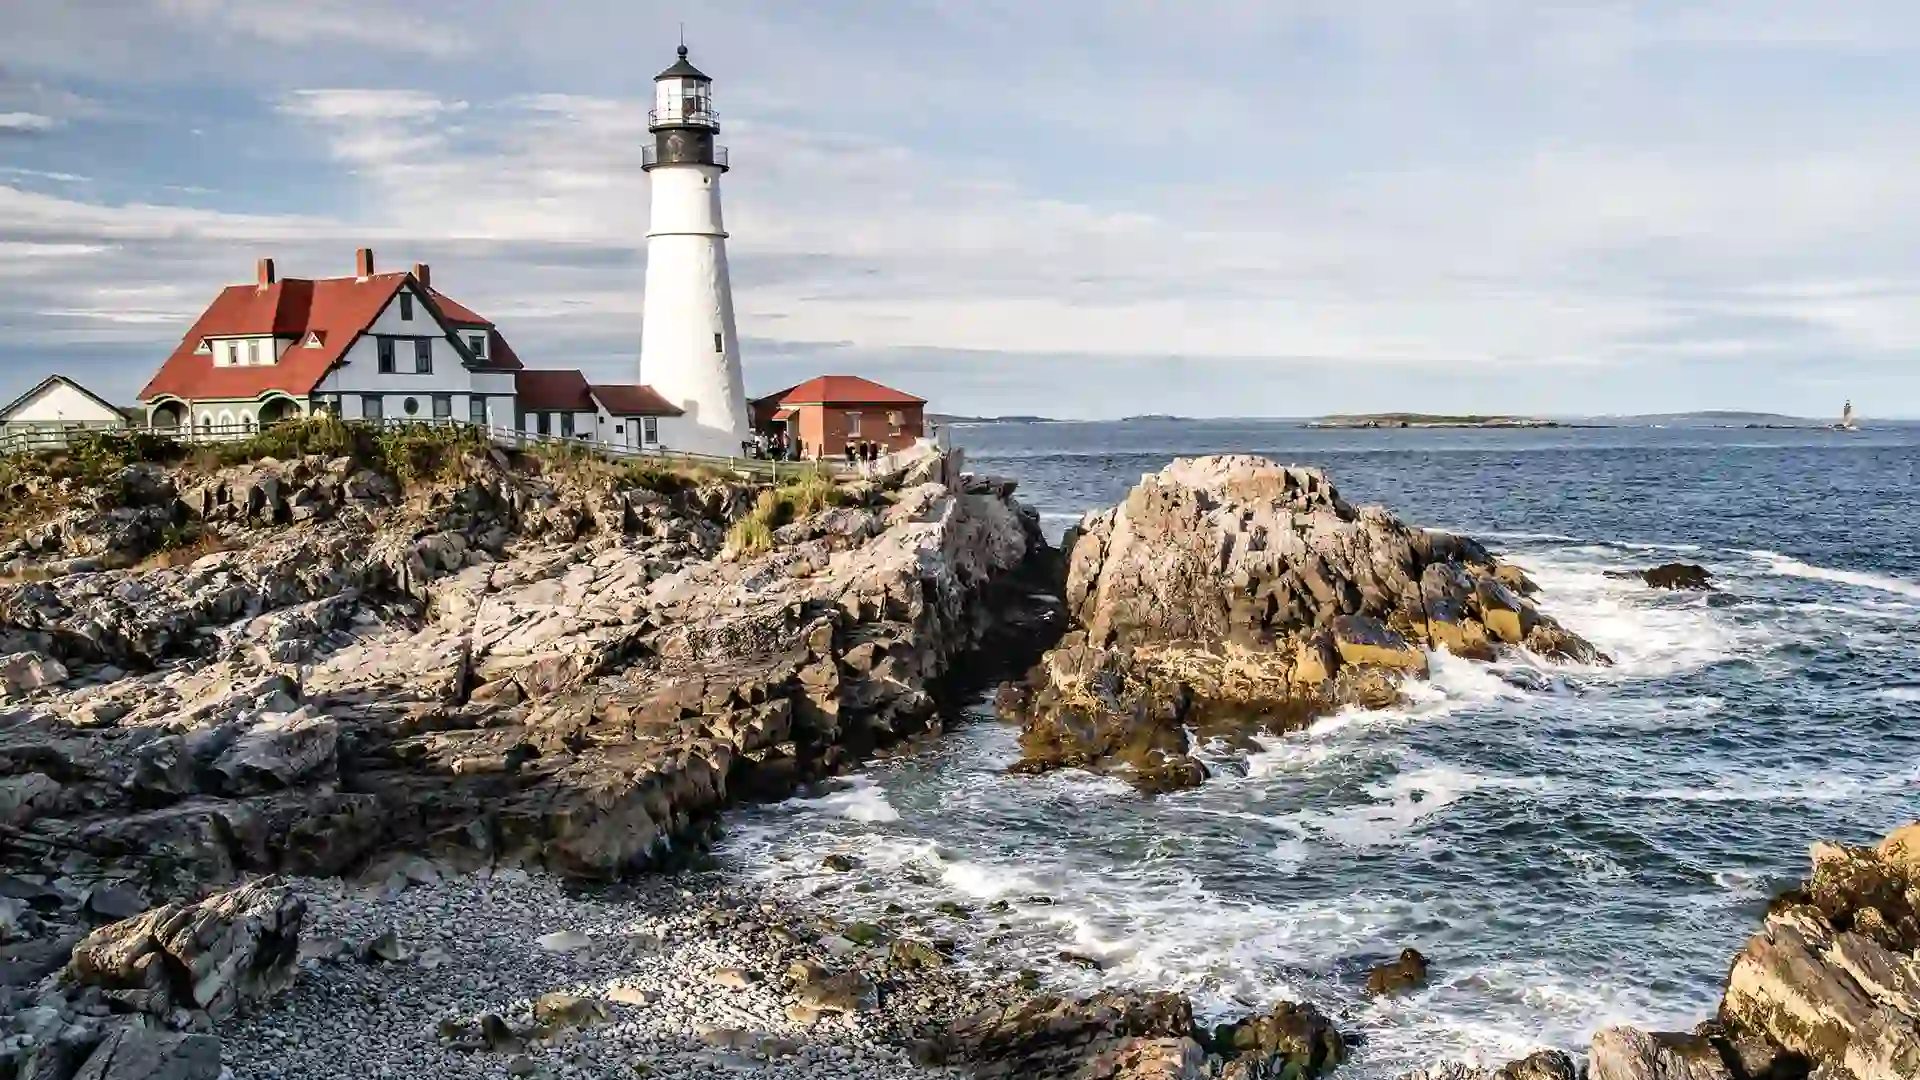 View of a tall white and black lighthouse overlooking a rocky shore.